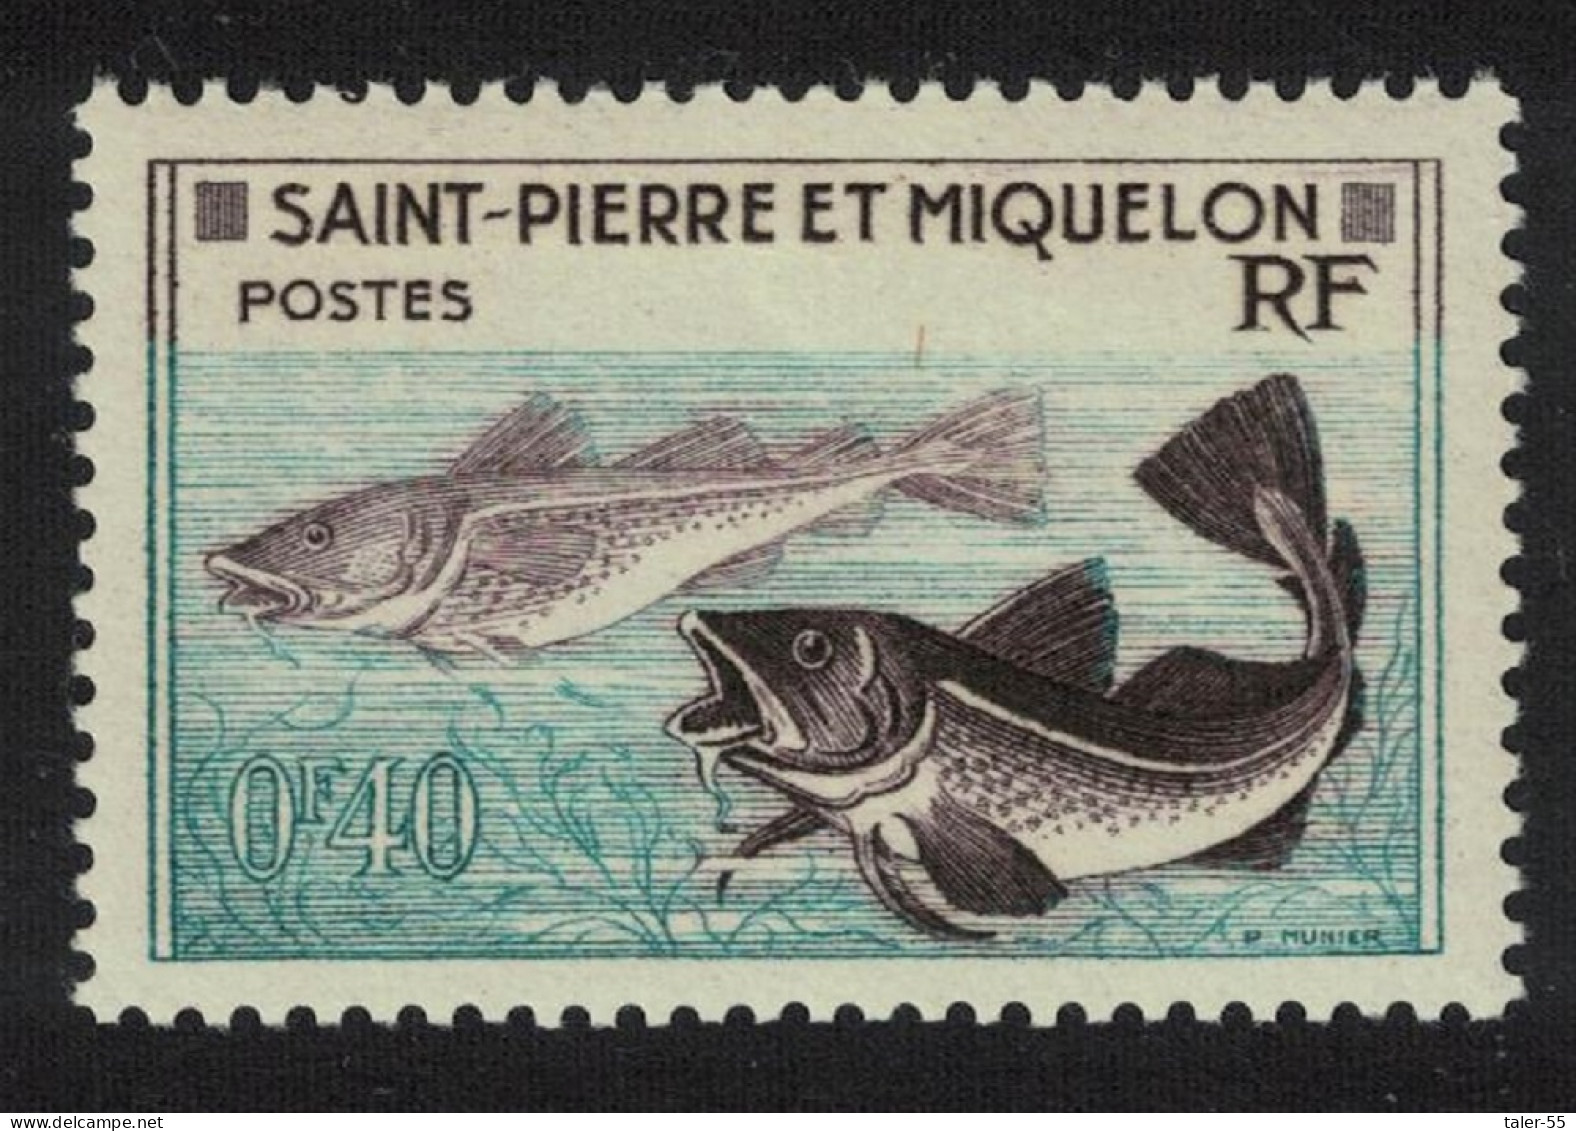 St. Pierre And Miquelon Codfish Fish 0.40Fr 1955 MNH SG#400 - Unused Stamps